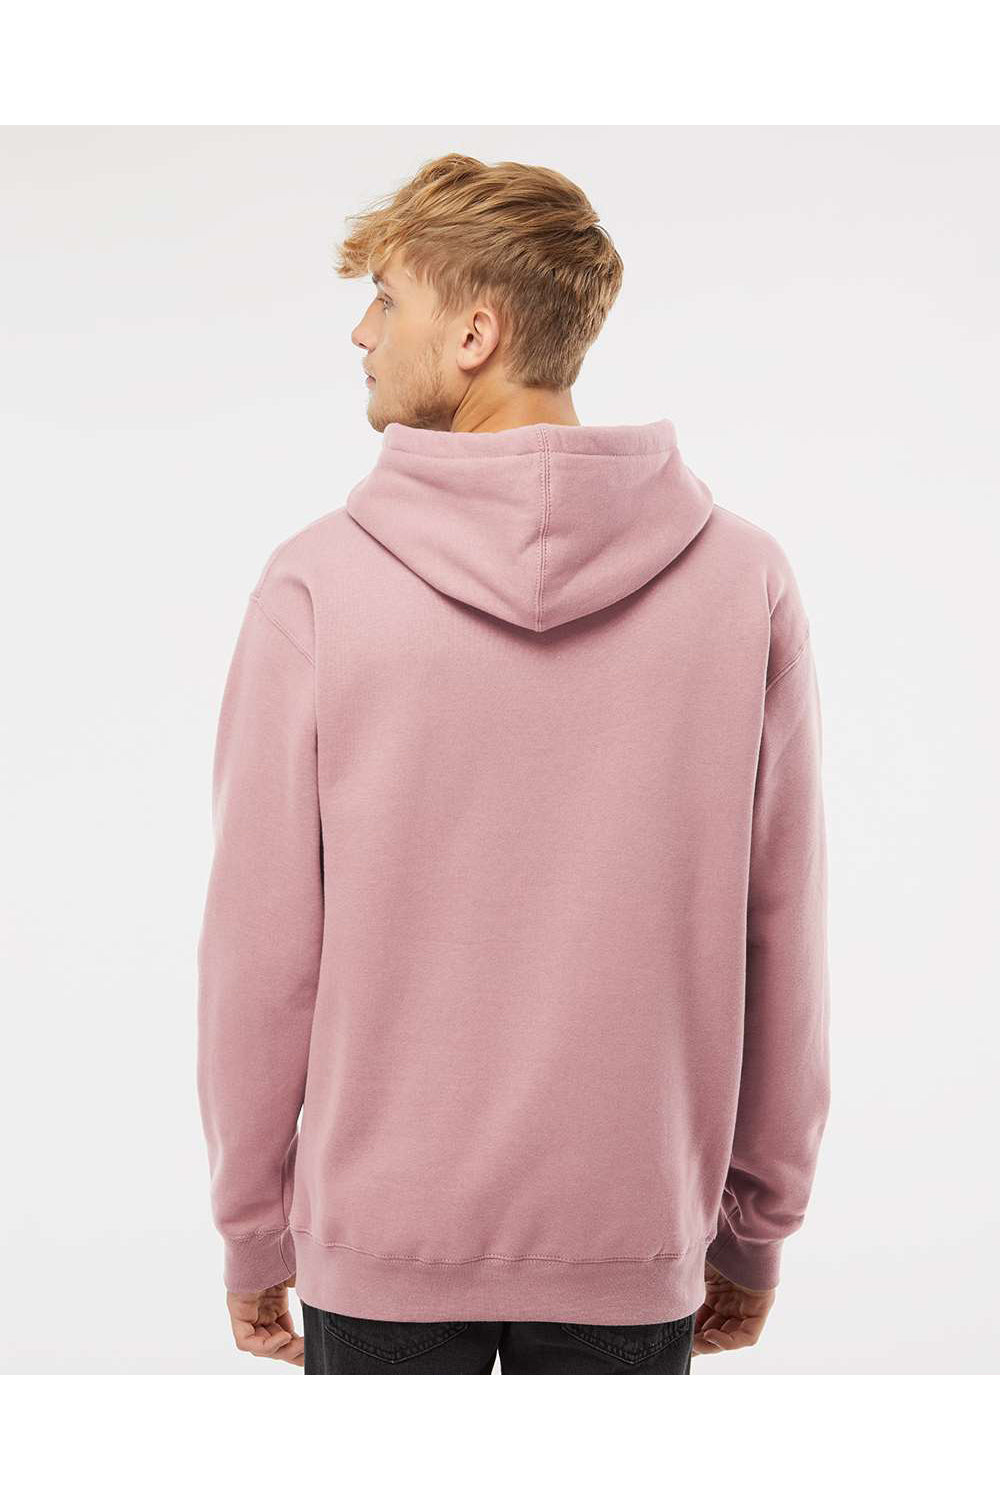 Independent Trading Co. IND4000 Mens Hooded Sweatshirt Hoodie Dusty Pink Model Back